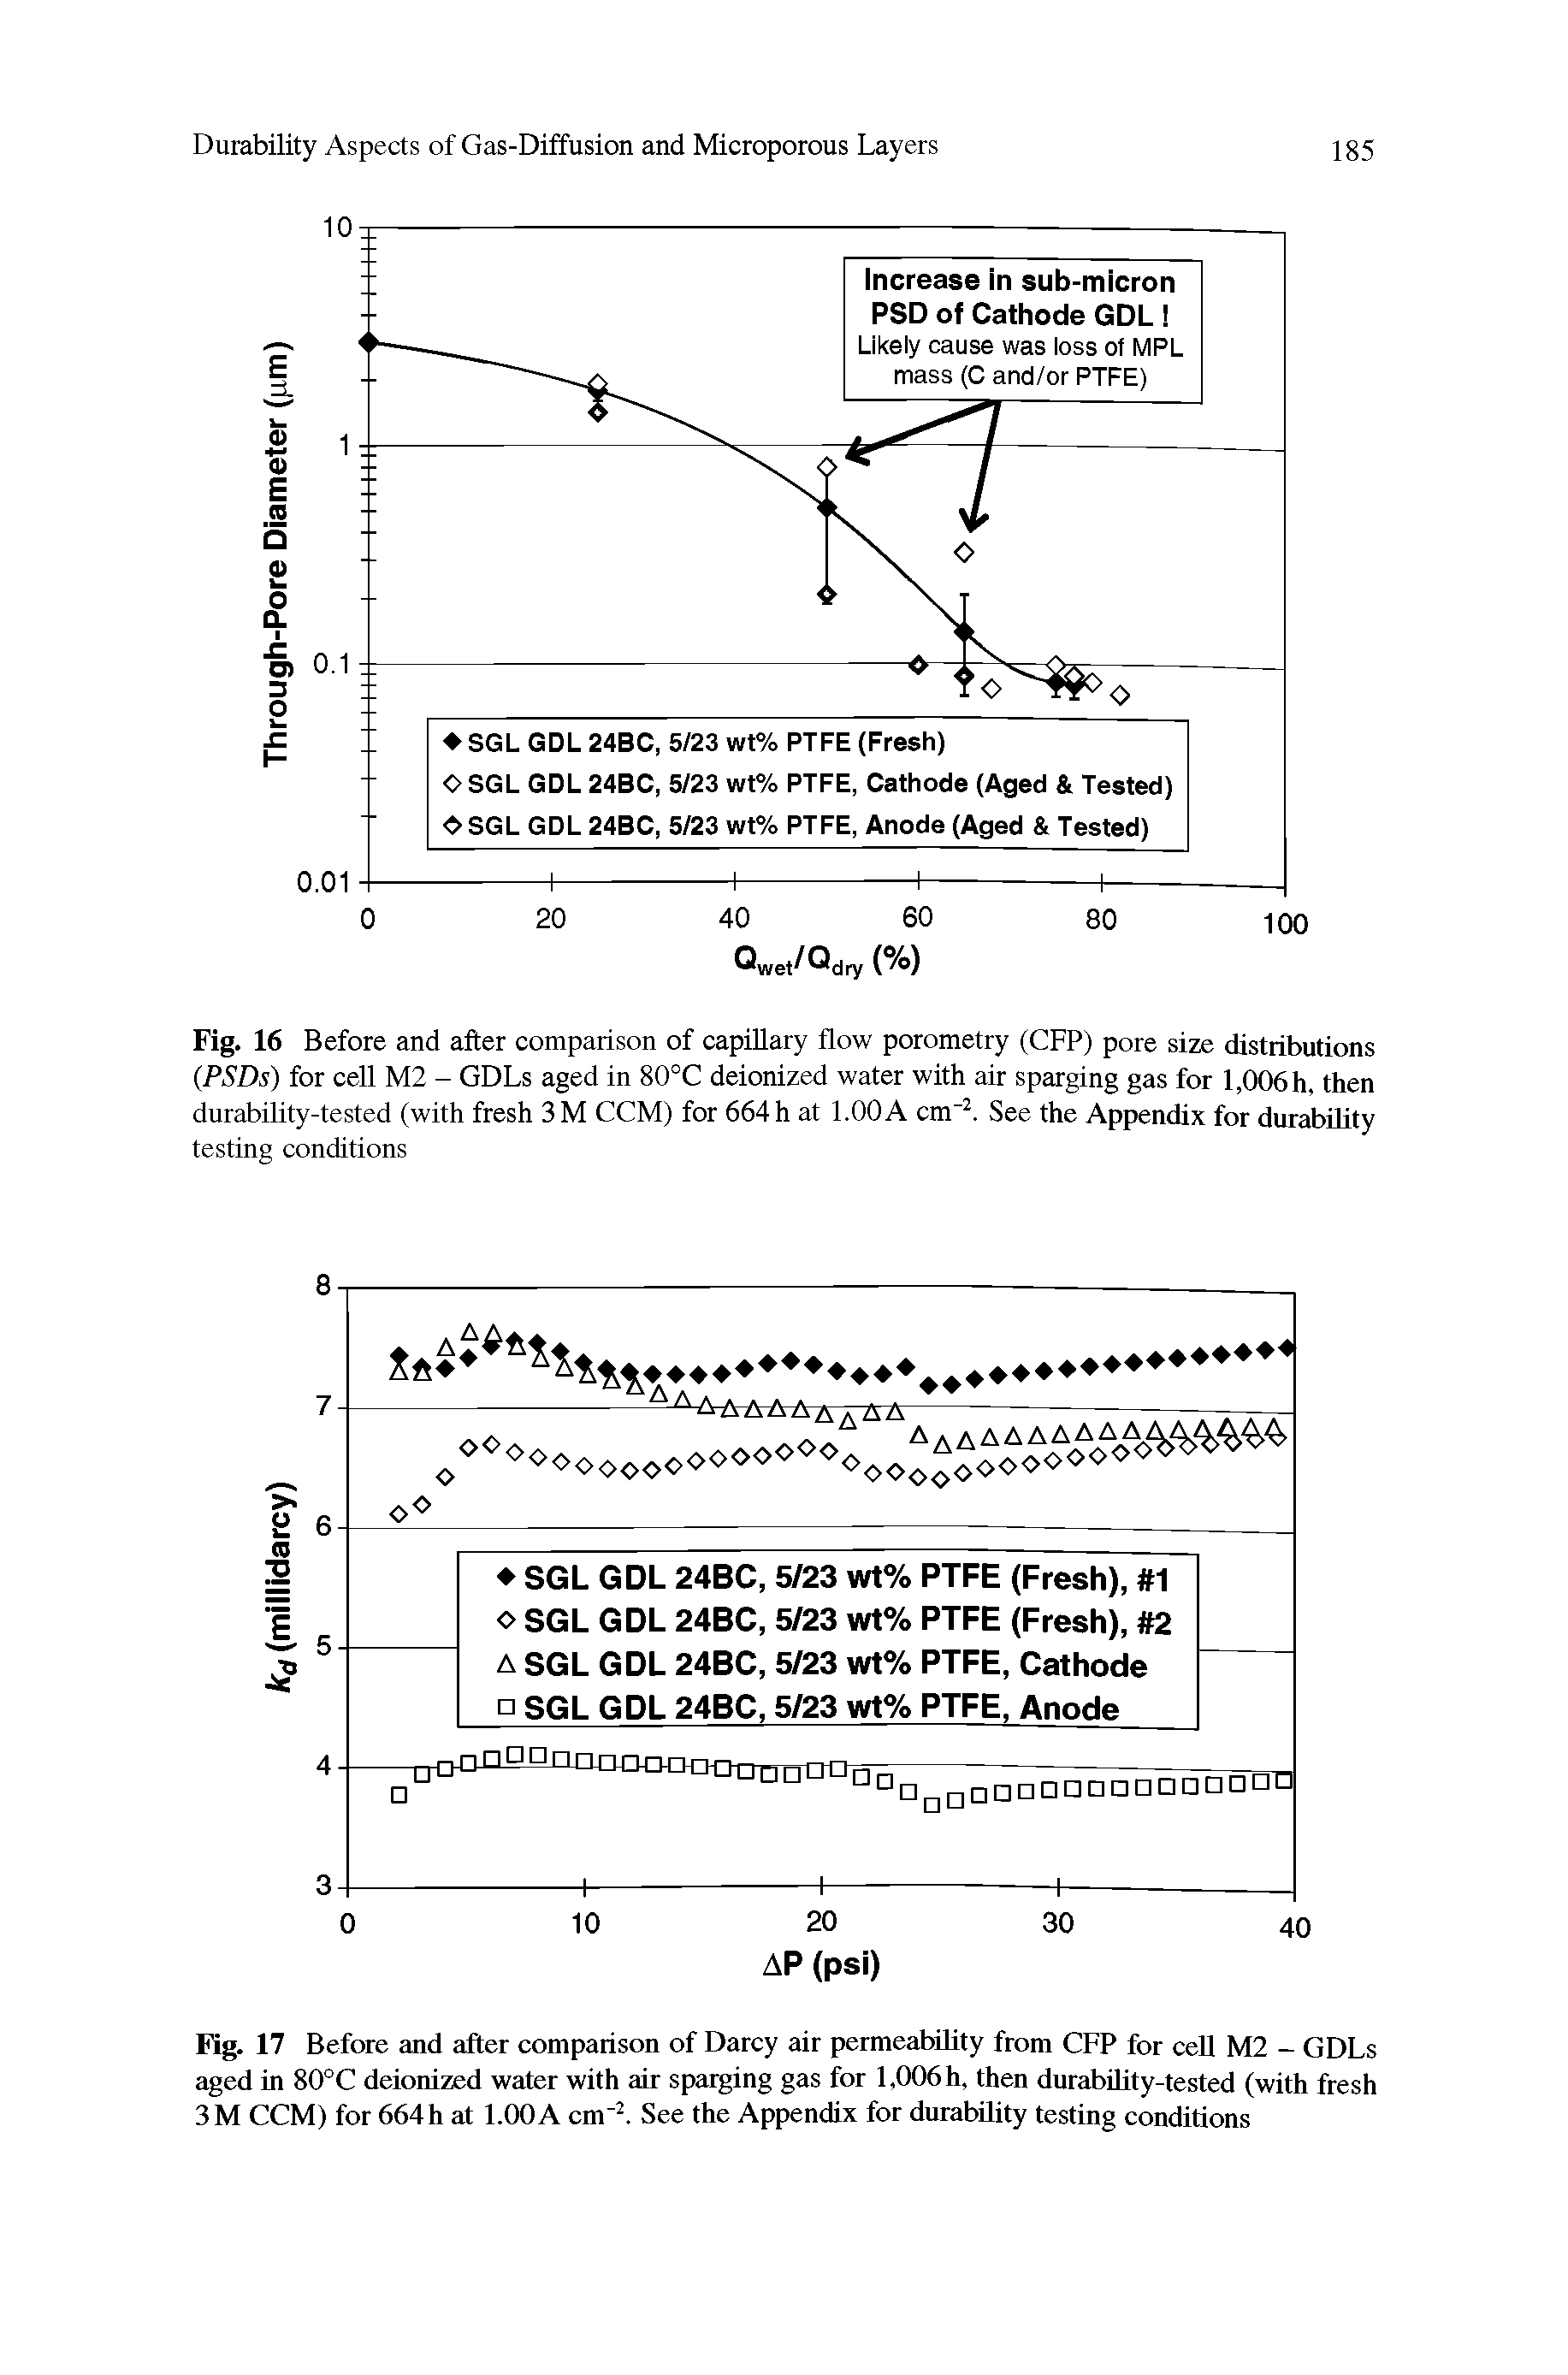 Fig. 16 Before and after comparison of capillary flow porometry (CFP) pore size distributions PSDs) for cell M2 - GDLs aged in 80°C deionized water with air sparging gas for l,006h, then durabihty-tested (with fresh 3M CCM) for 664 h at 1.00 A cm". See the Appendix for durability testing conditions...